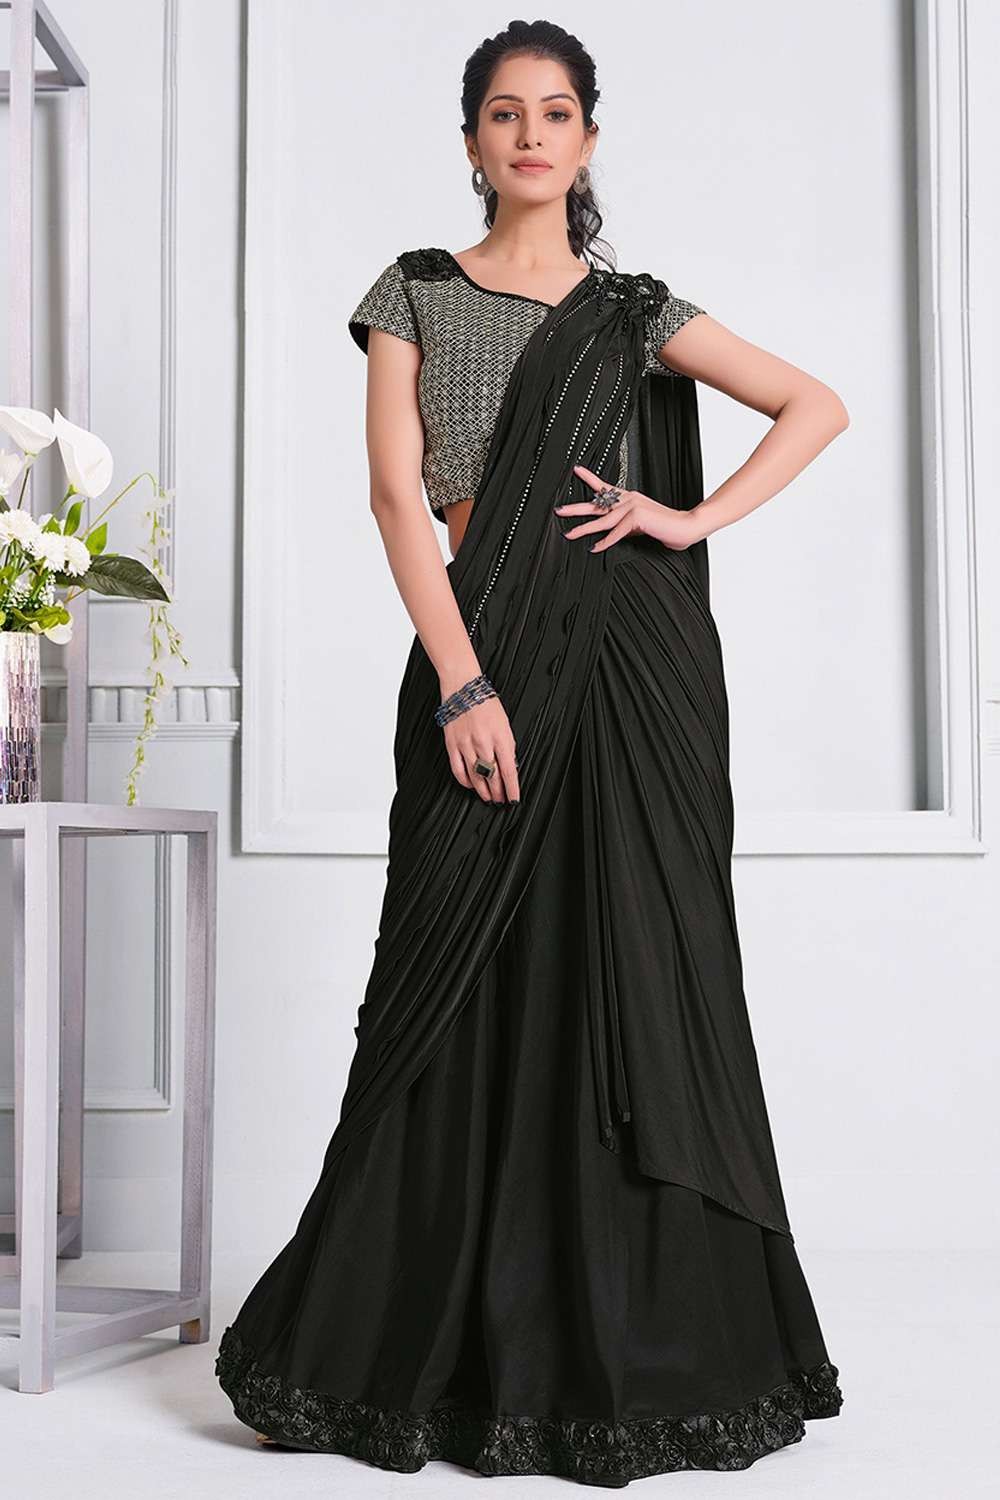 Lycra Party Wear Saree with Sequins,embroidered in Black - SR22621